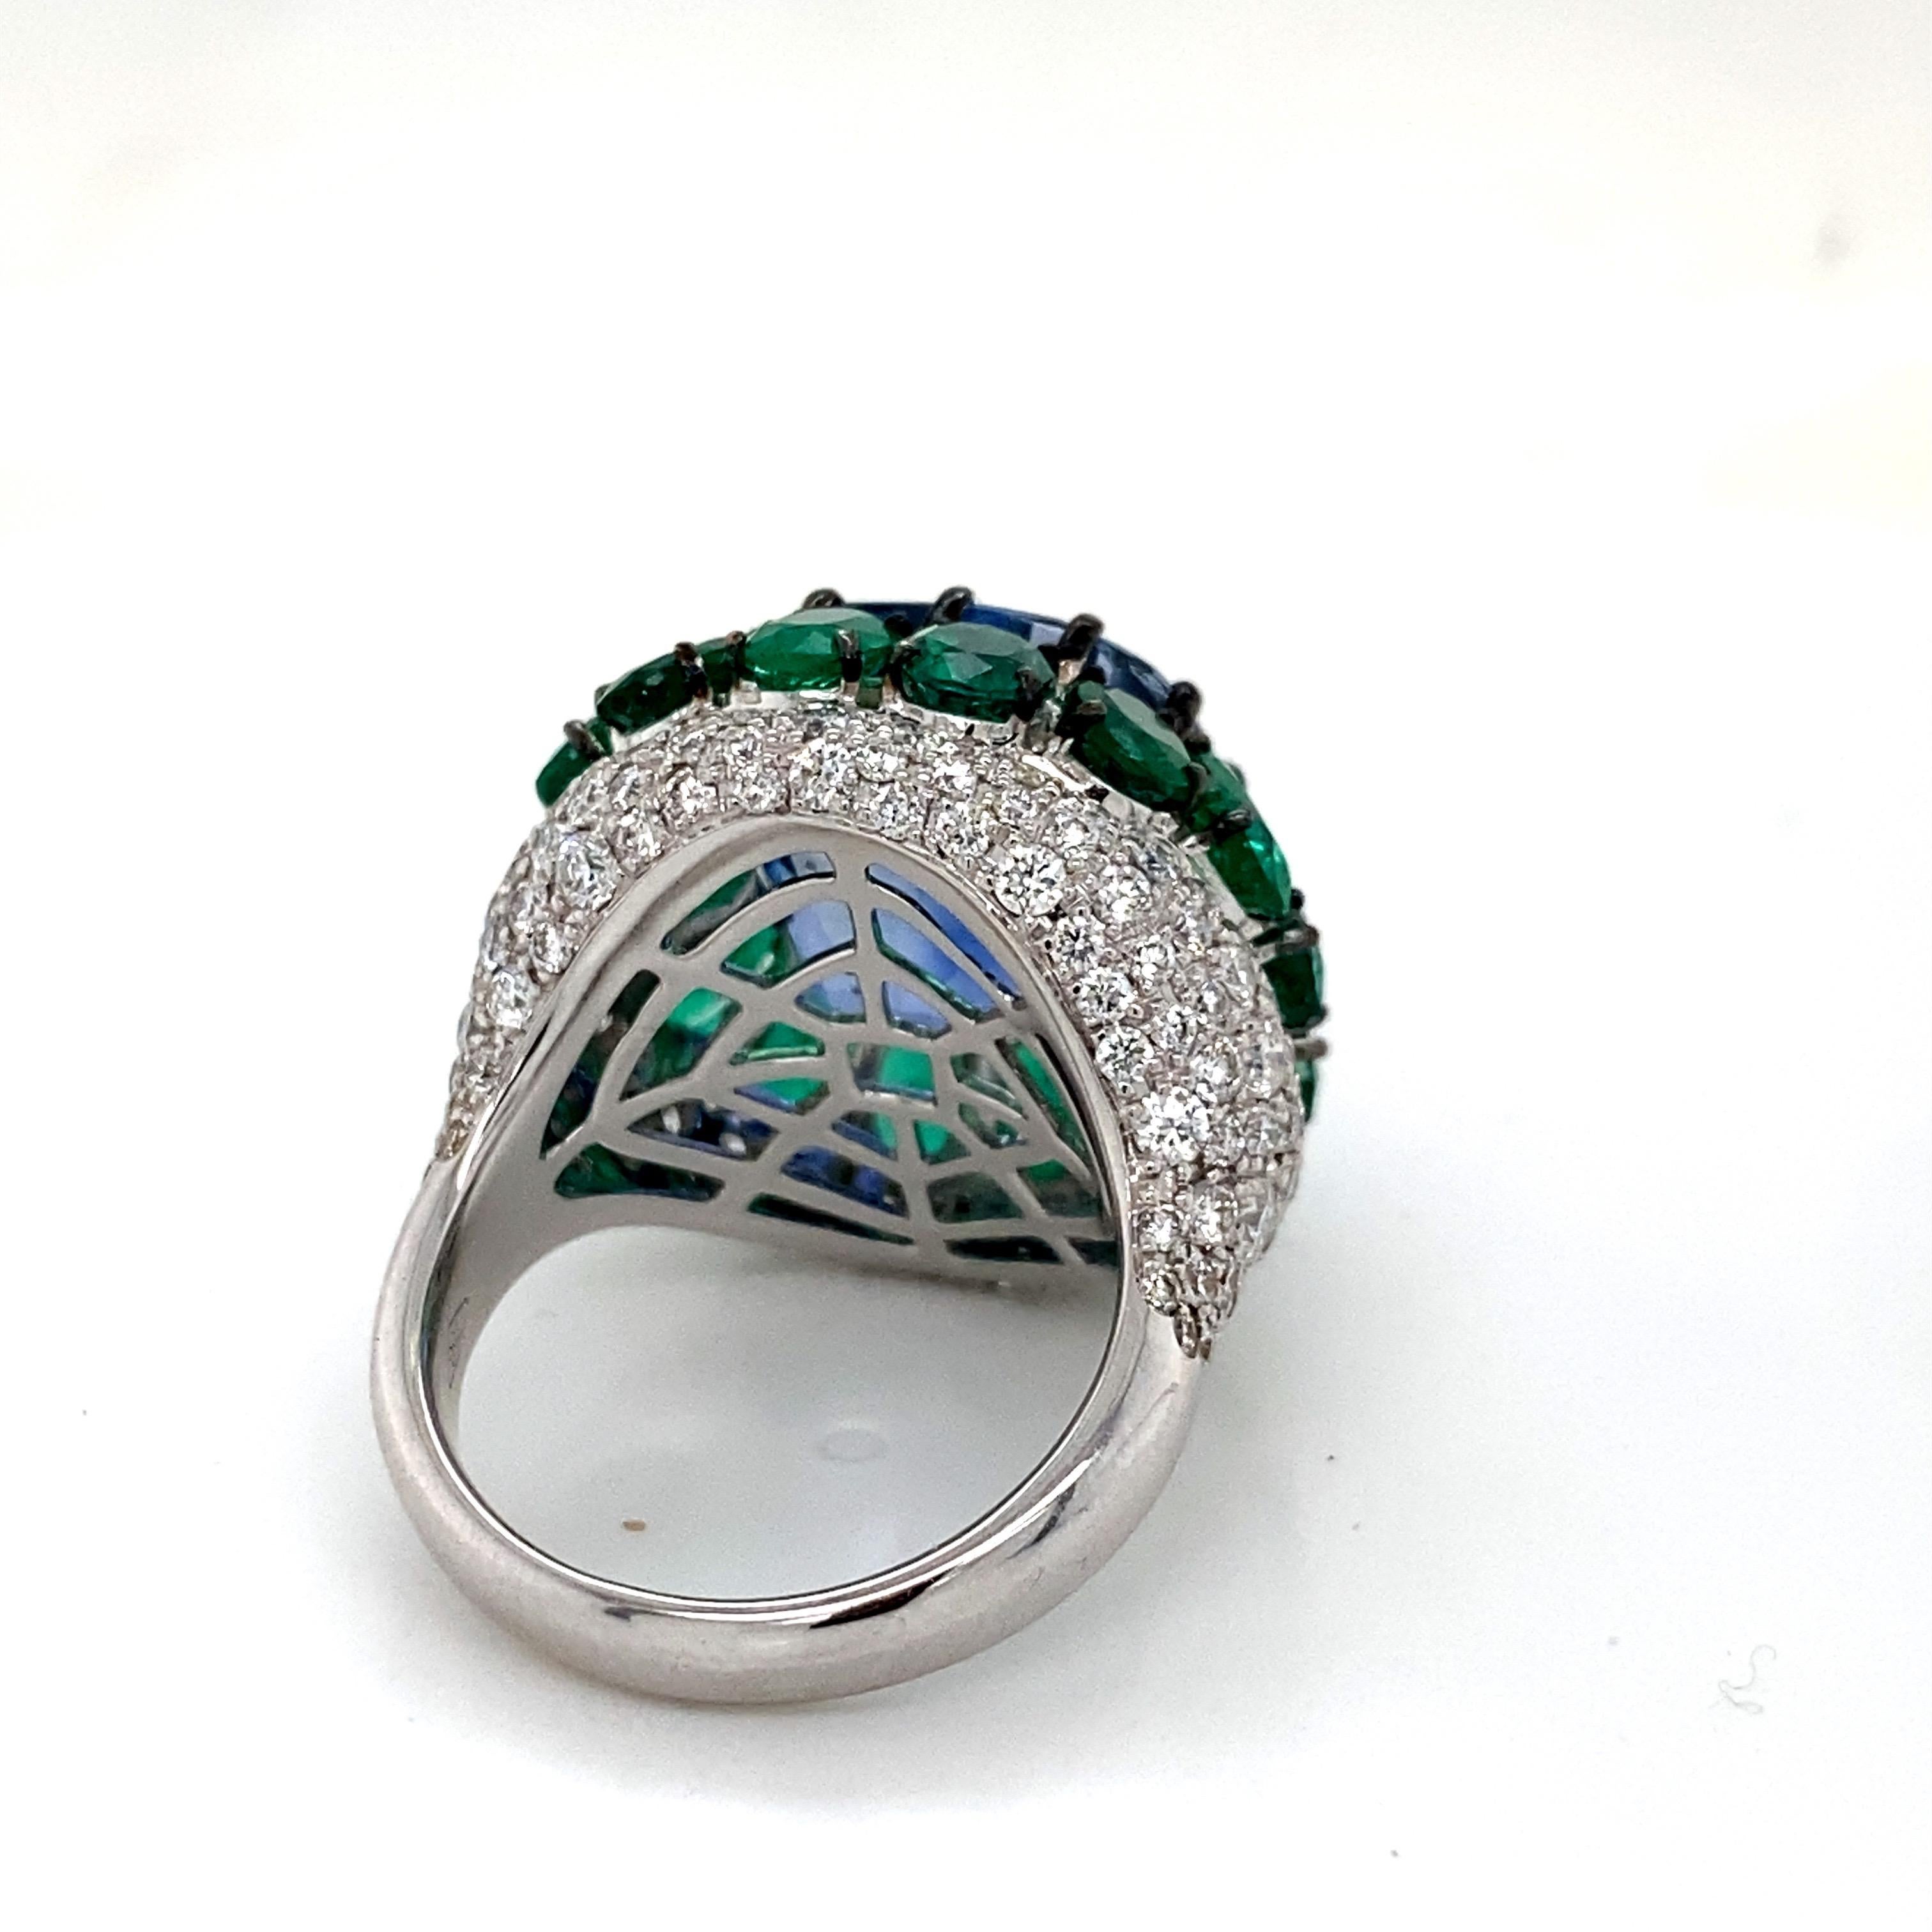 From the Museum Vault at Emilio Jewelry New York,
Untreated sapphires from Burma are extremely rare, and sought after by collectors worldwide. 
You will love this ring, a must see! Private showings may be available depending on your location. 
If